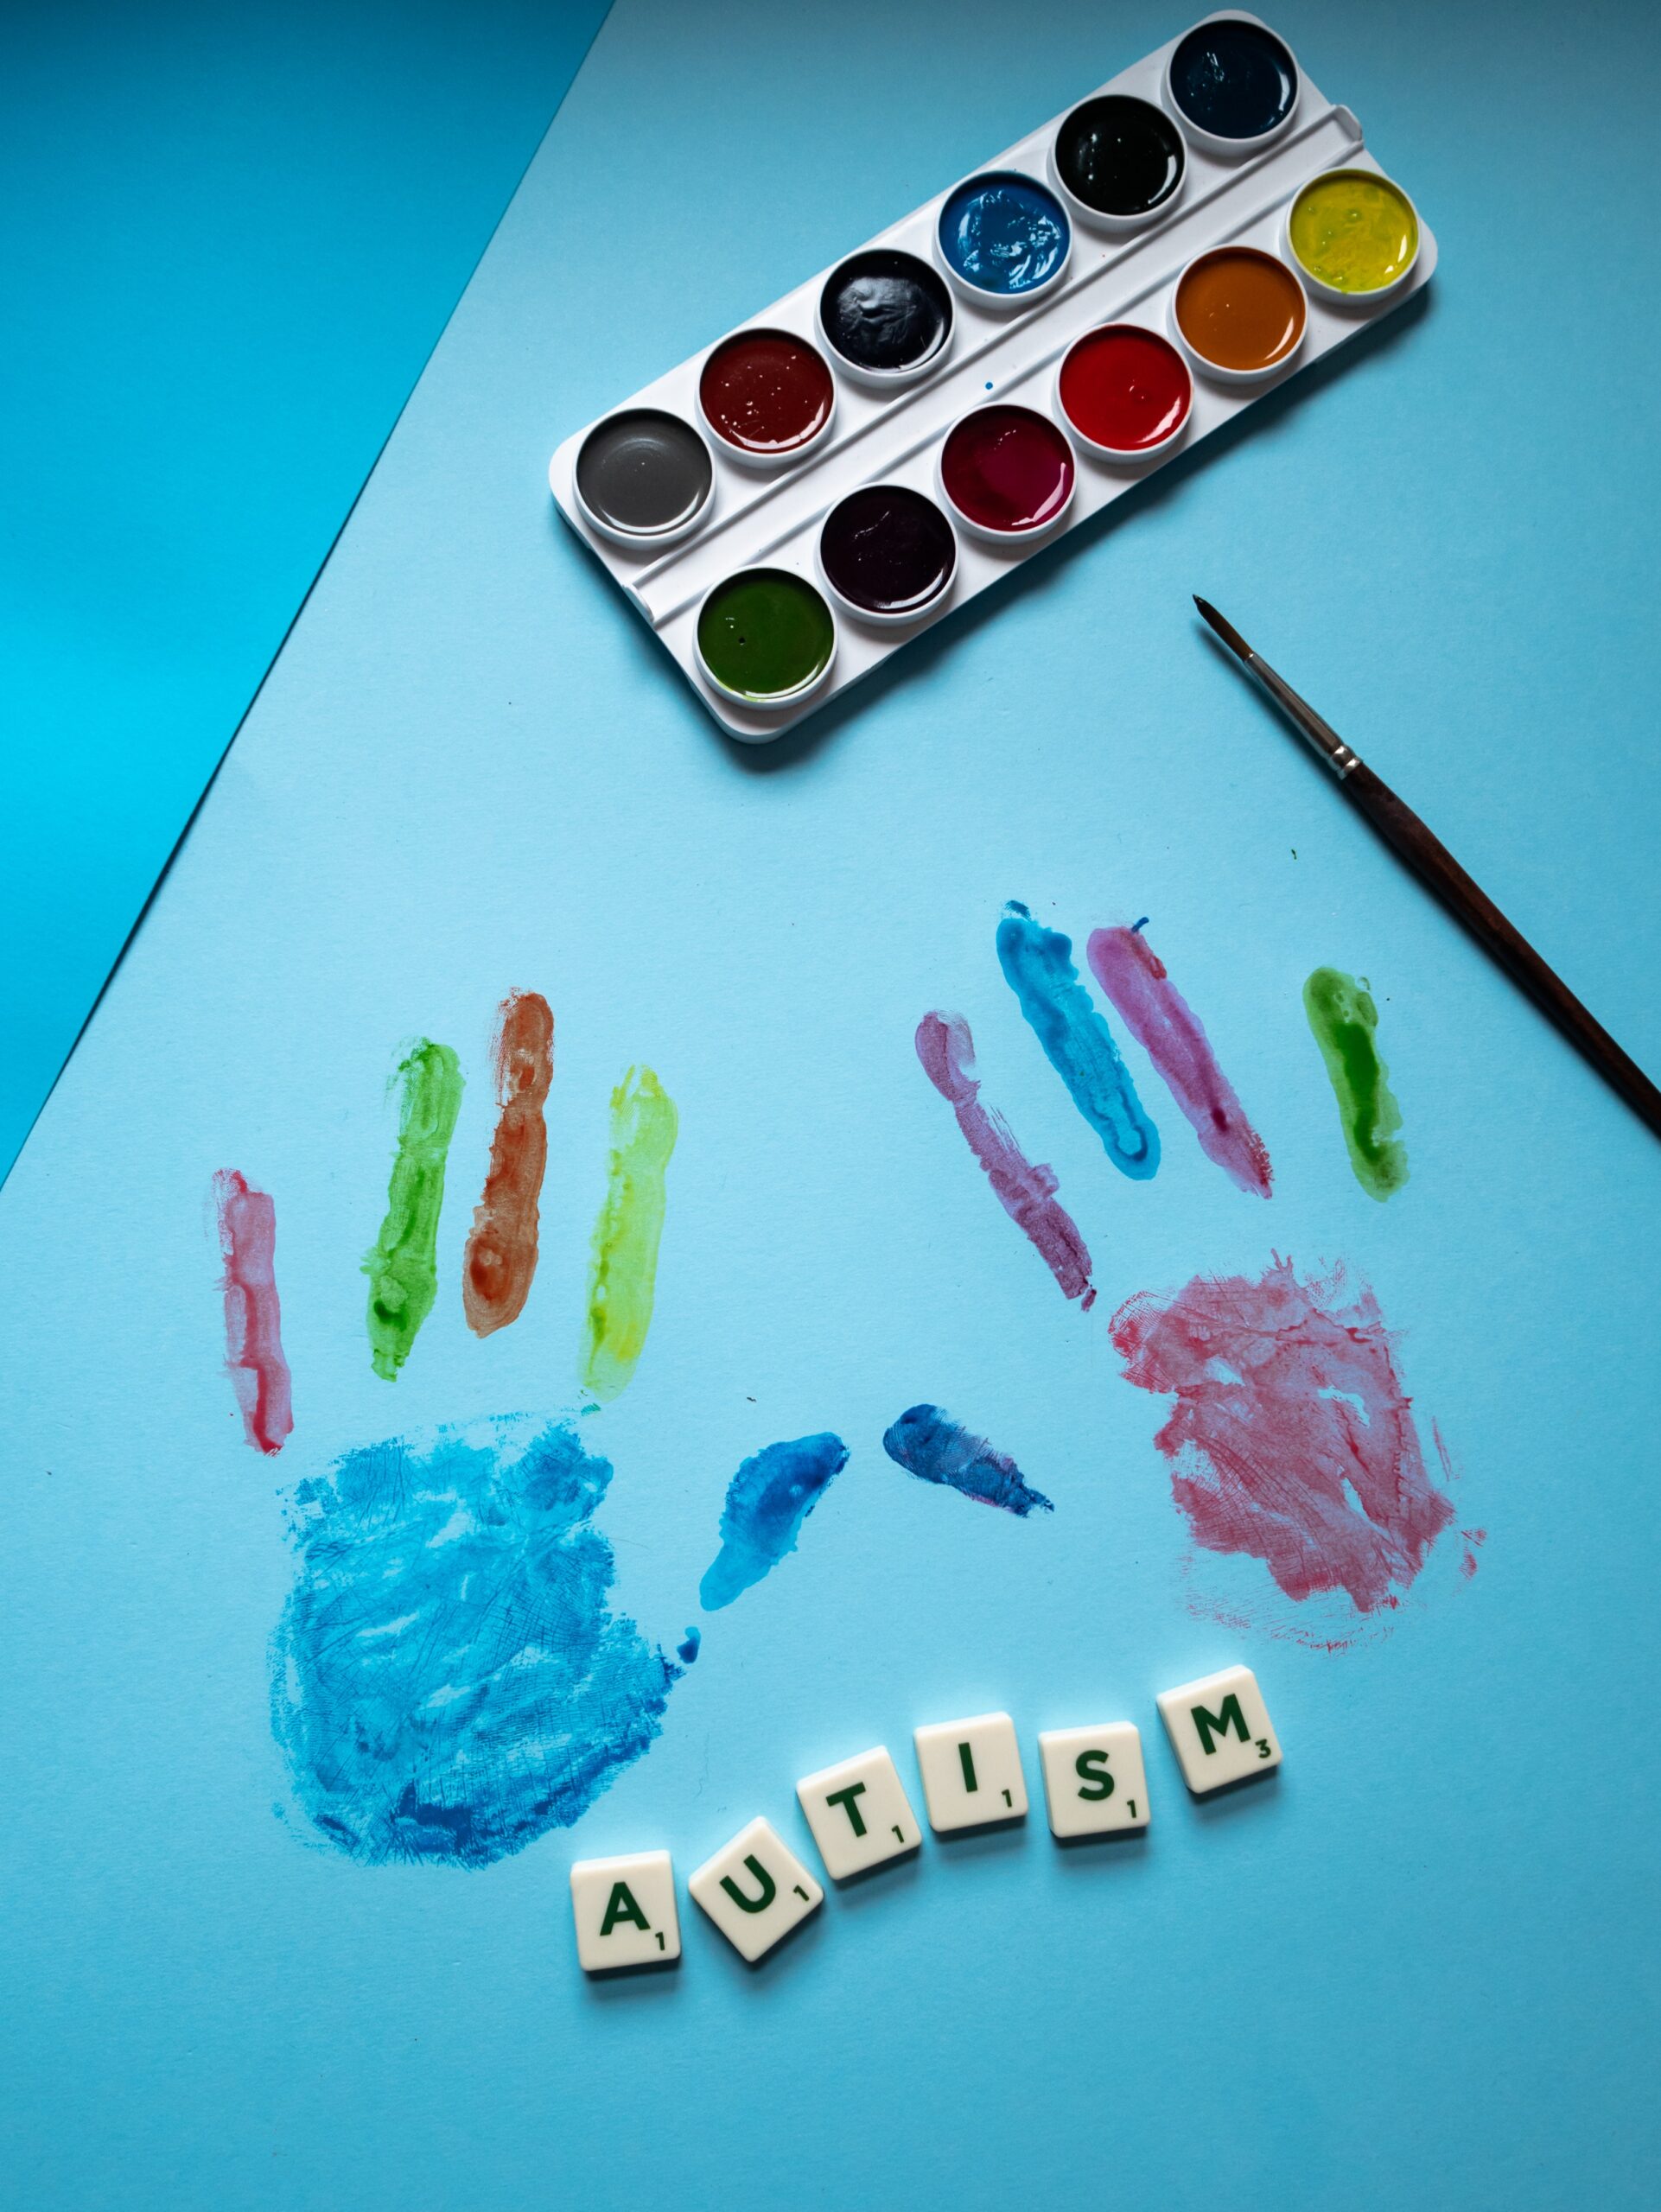 hands printed with multicolored paint and letters spelling out Autism